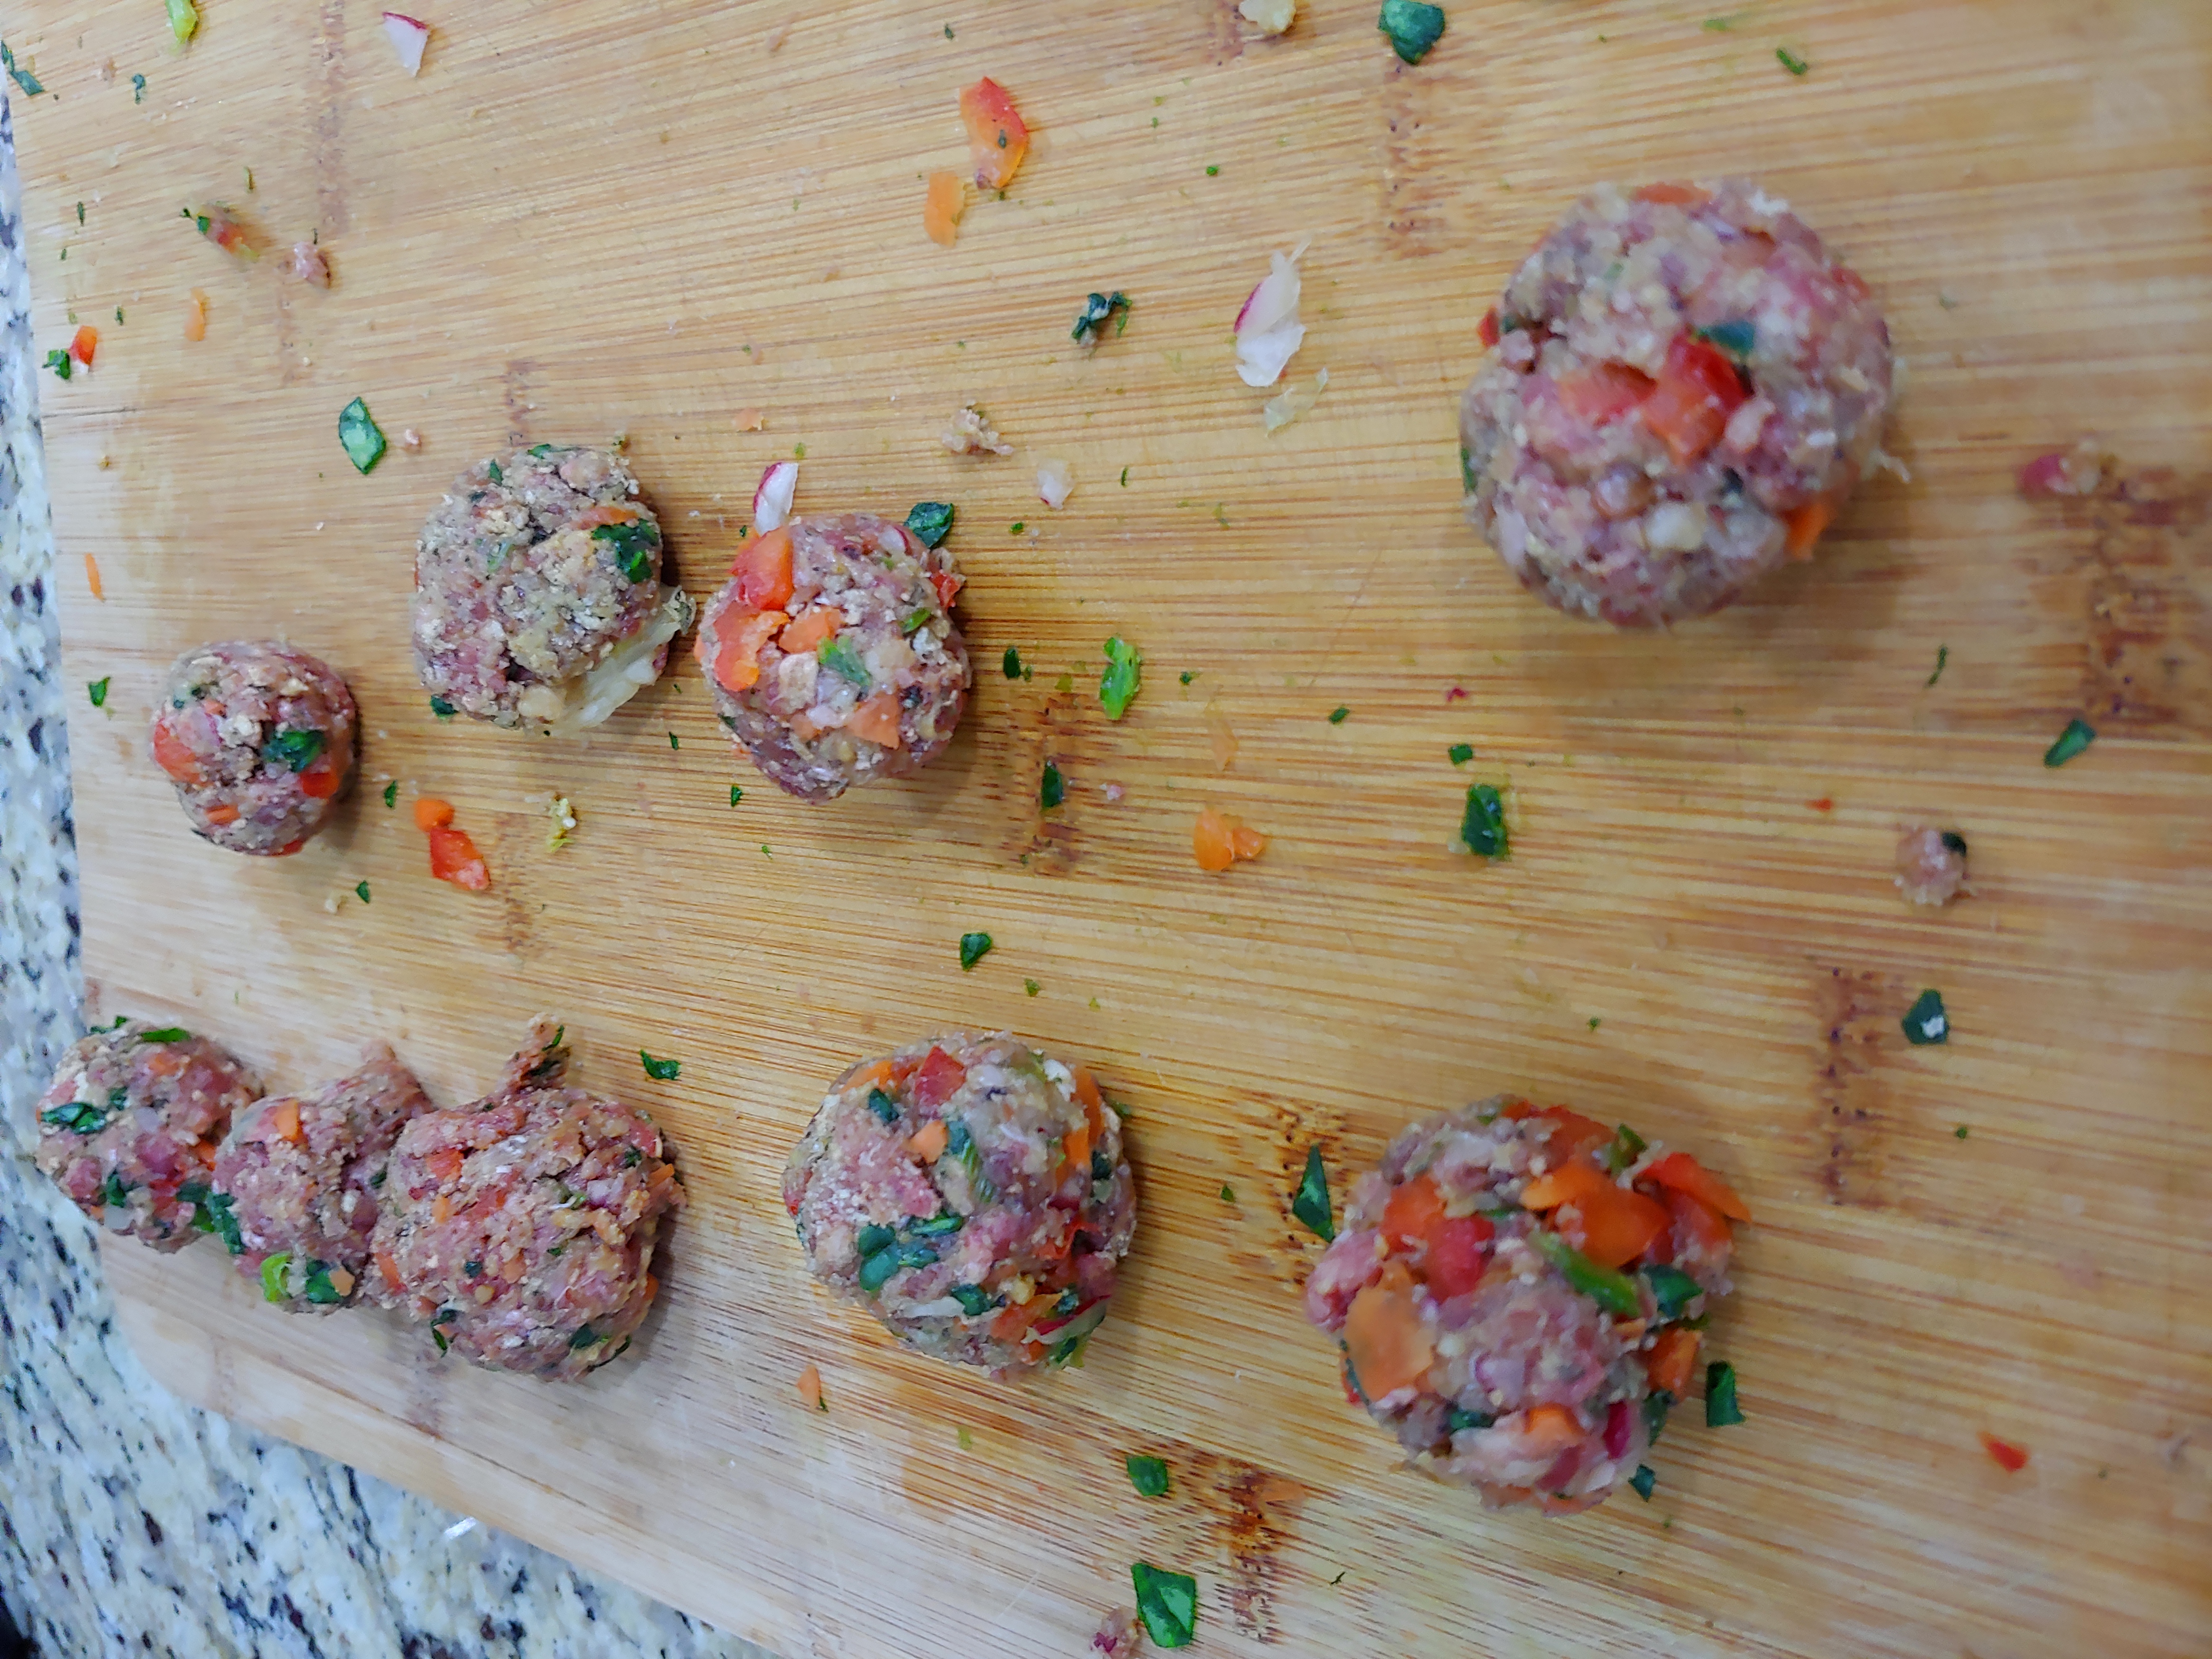 Prepared and molded Meatballs